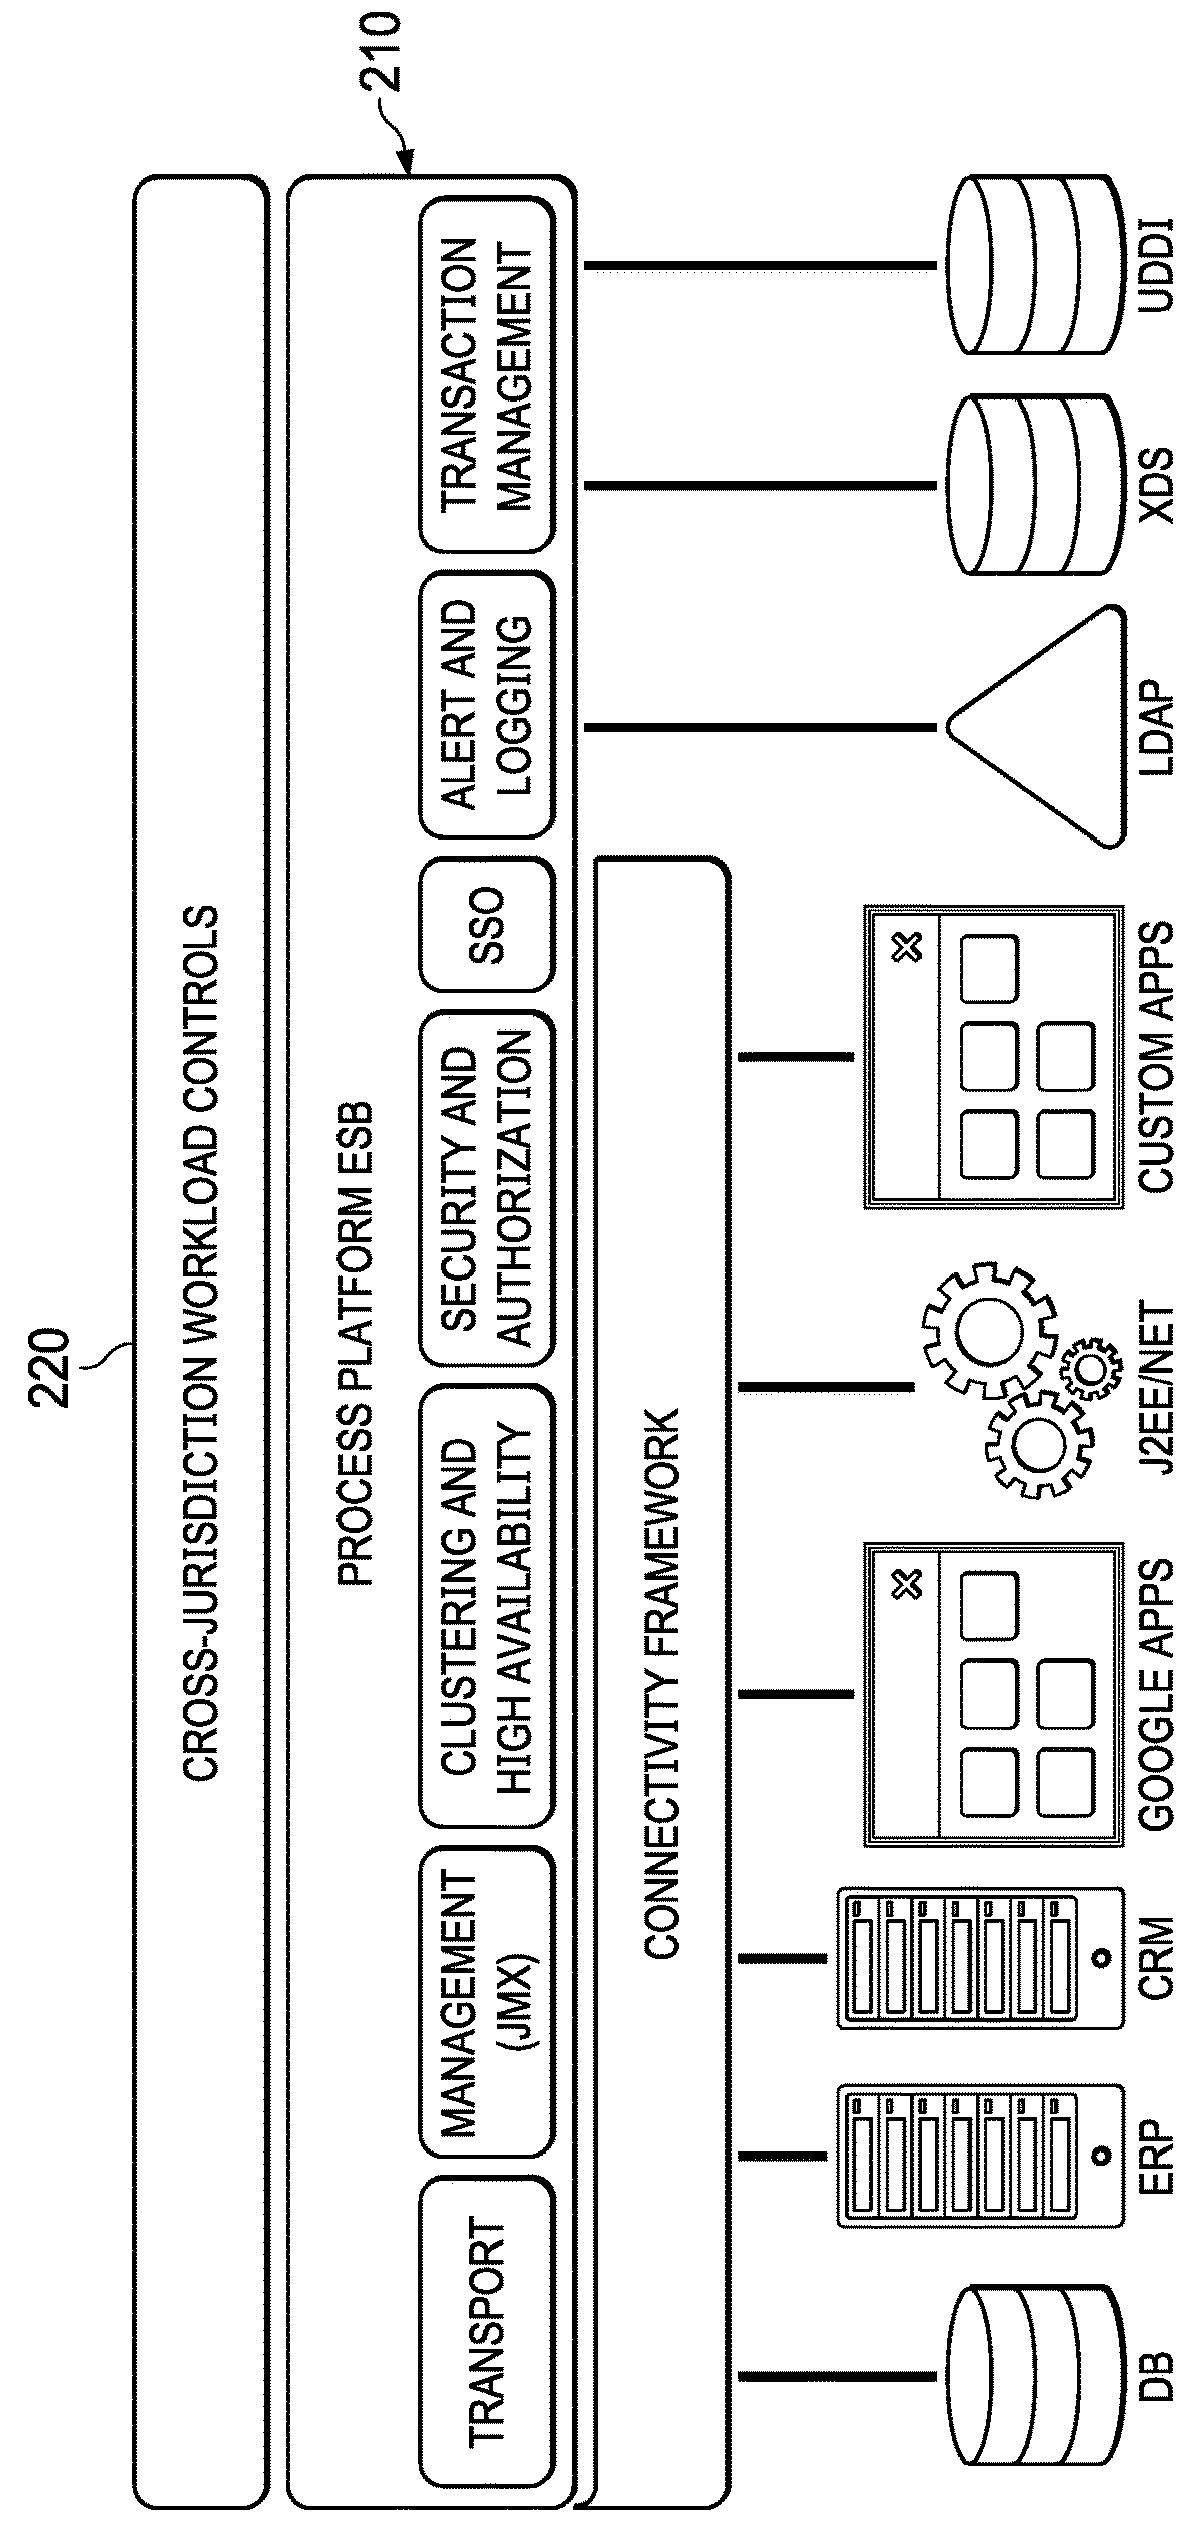 Cross-jurisdiction workload control systems and methods